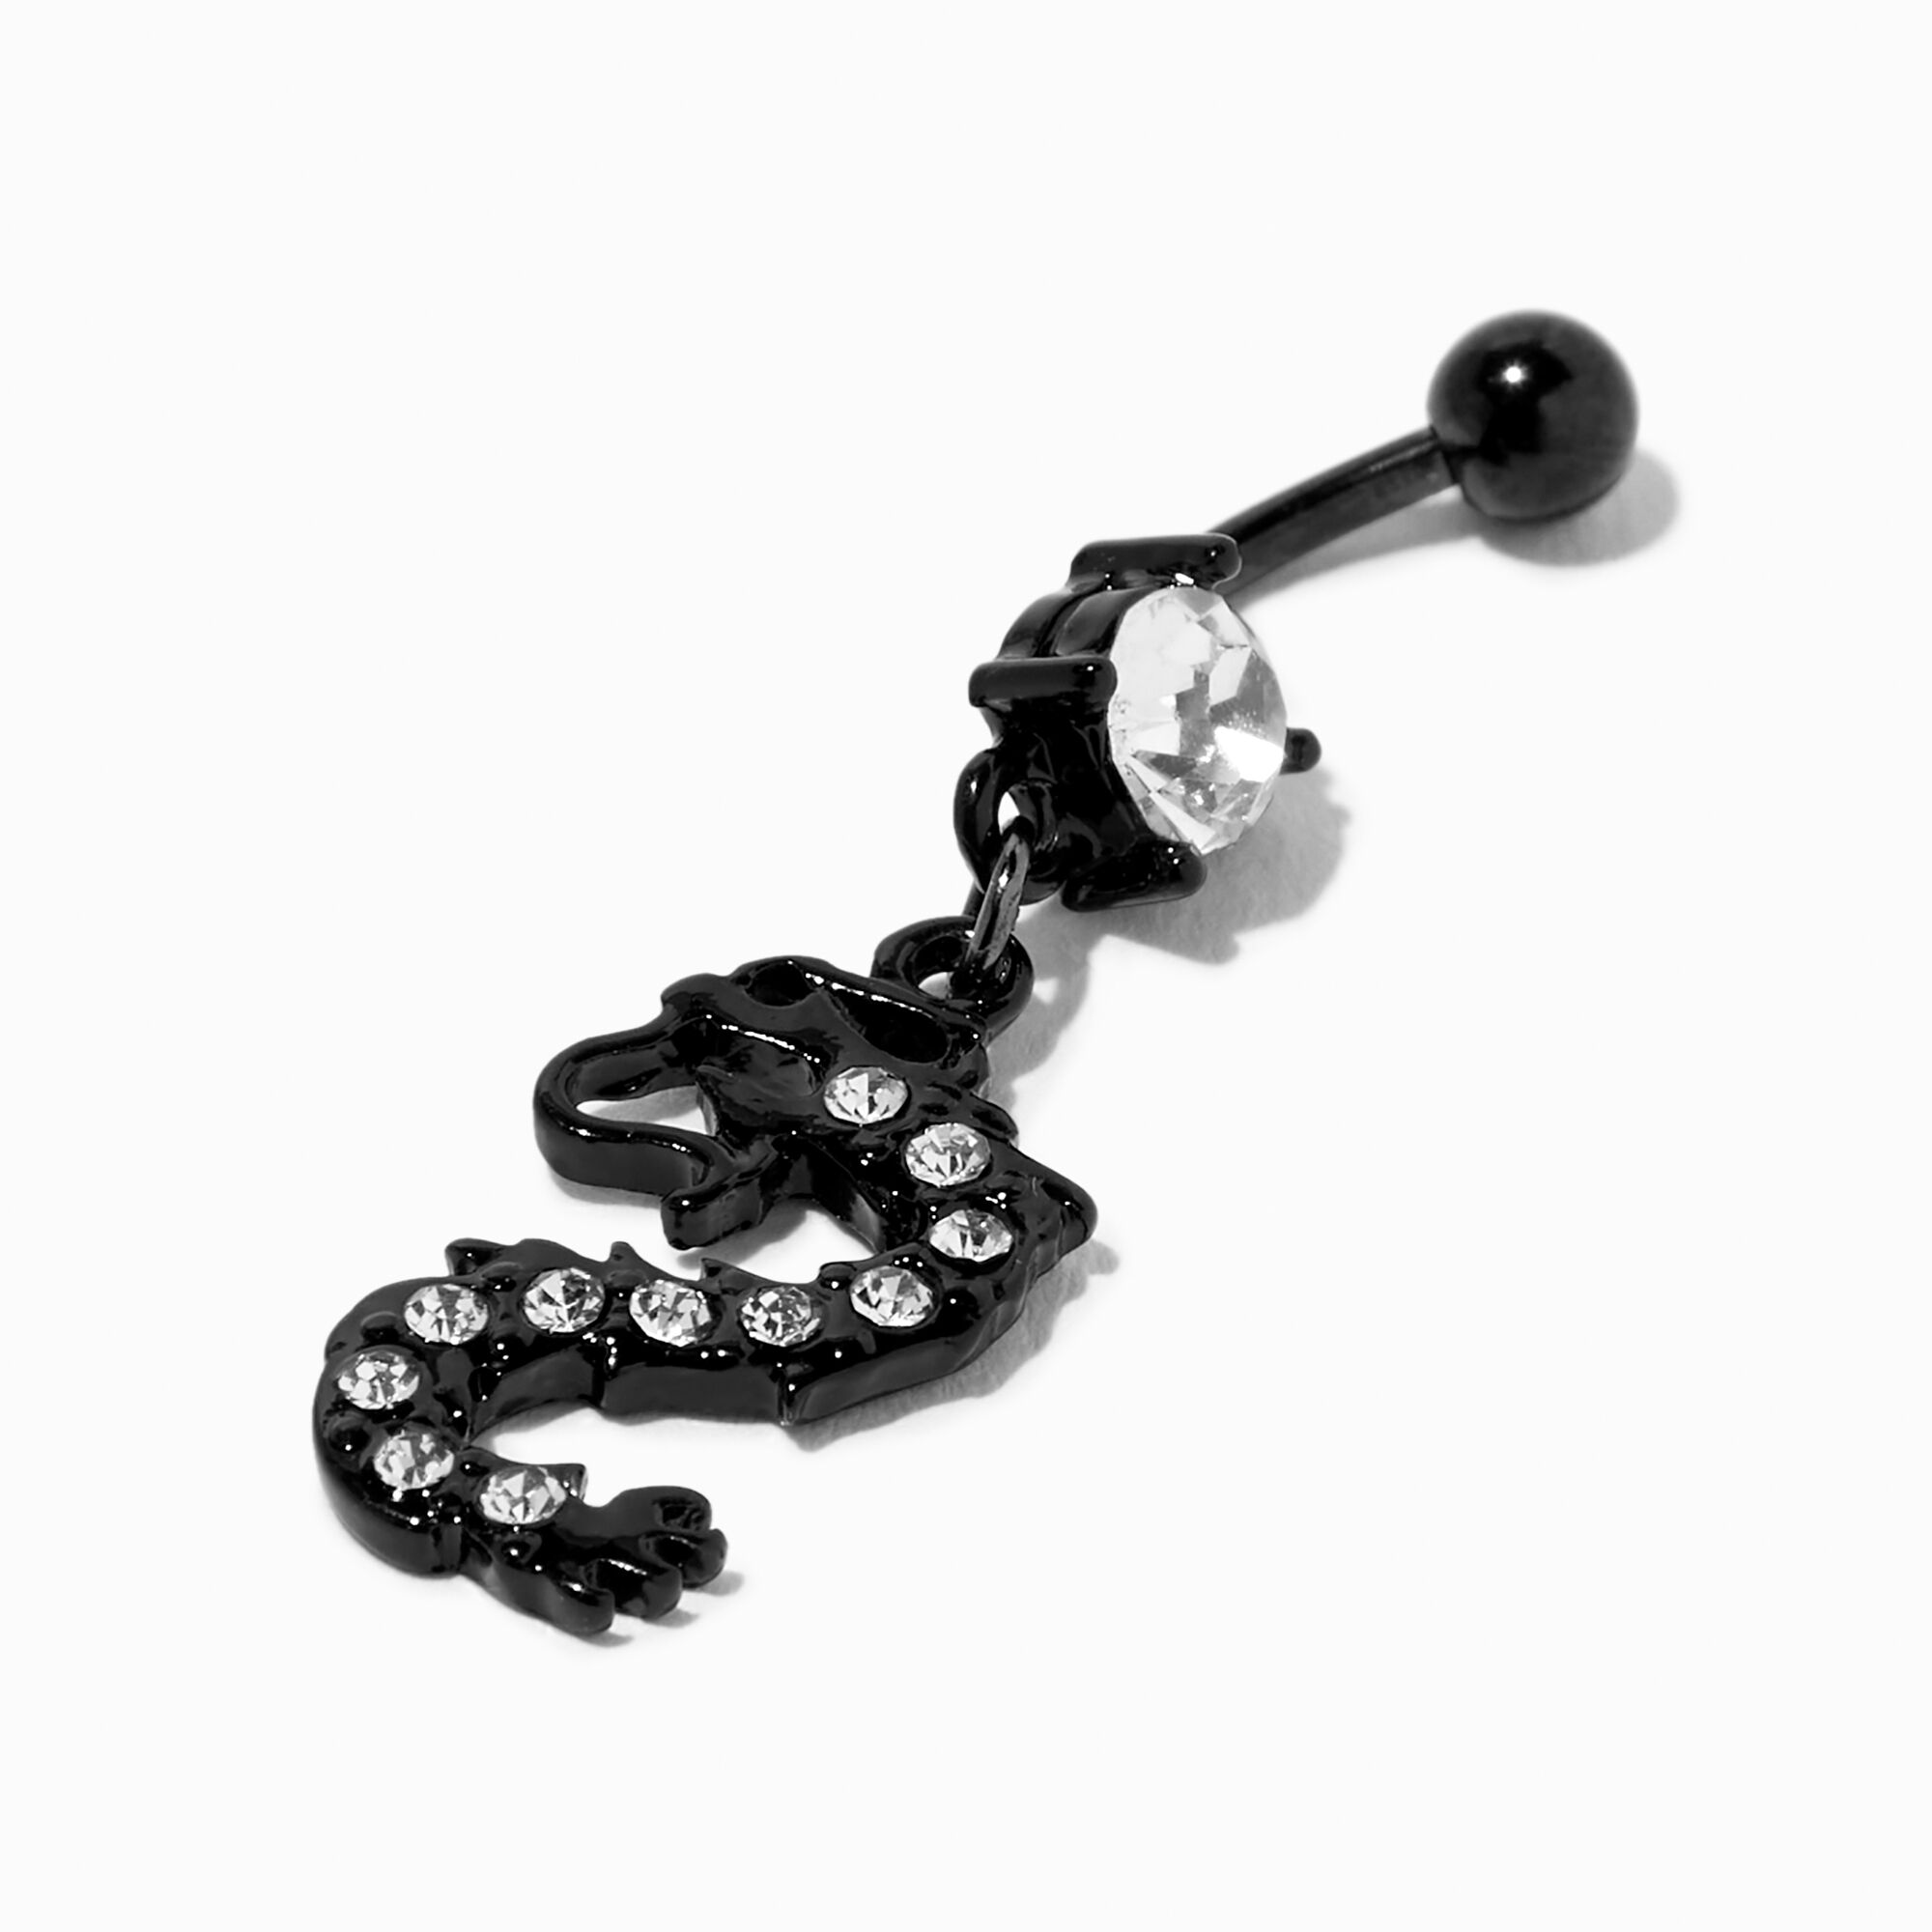 View Claires Embellished Dragon 14G Dangle Belly Ring Black information